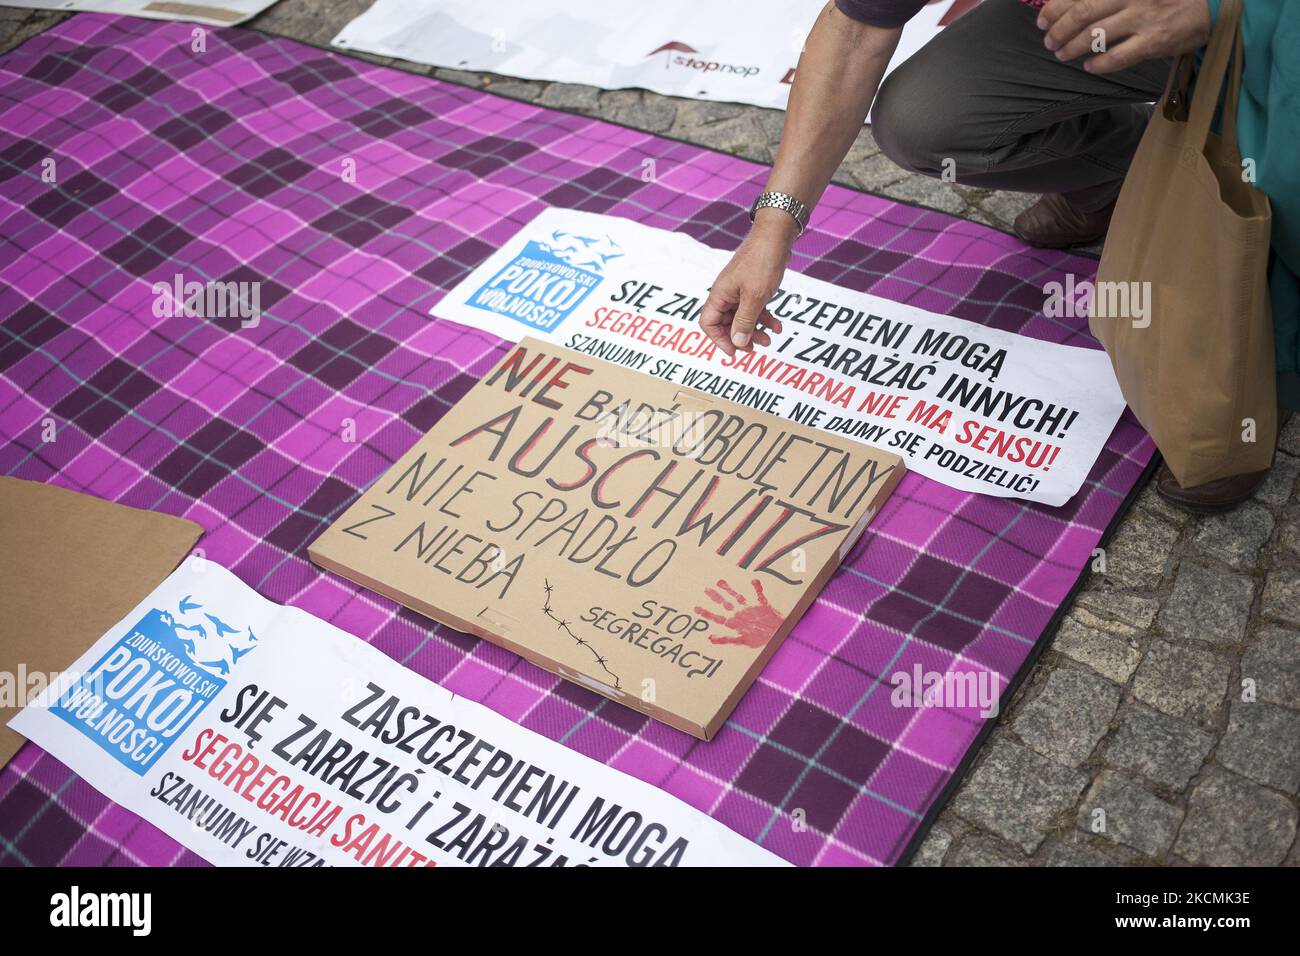 Do not be indifferent Auschwitz did not come from nowhere banner seen during protest against compulsory vaccination and sanitary segregation proposed in the so called Act 1449 in Warsaw on September 15, 2021. (Photo by Maciej Luczniewski/NurPhoto) Stock Photo